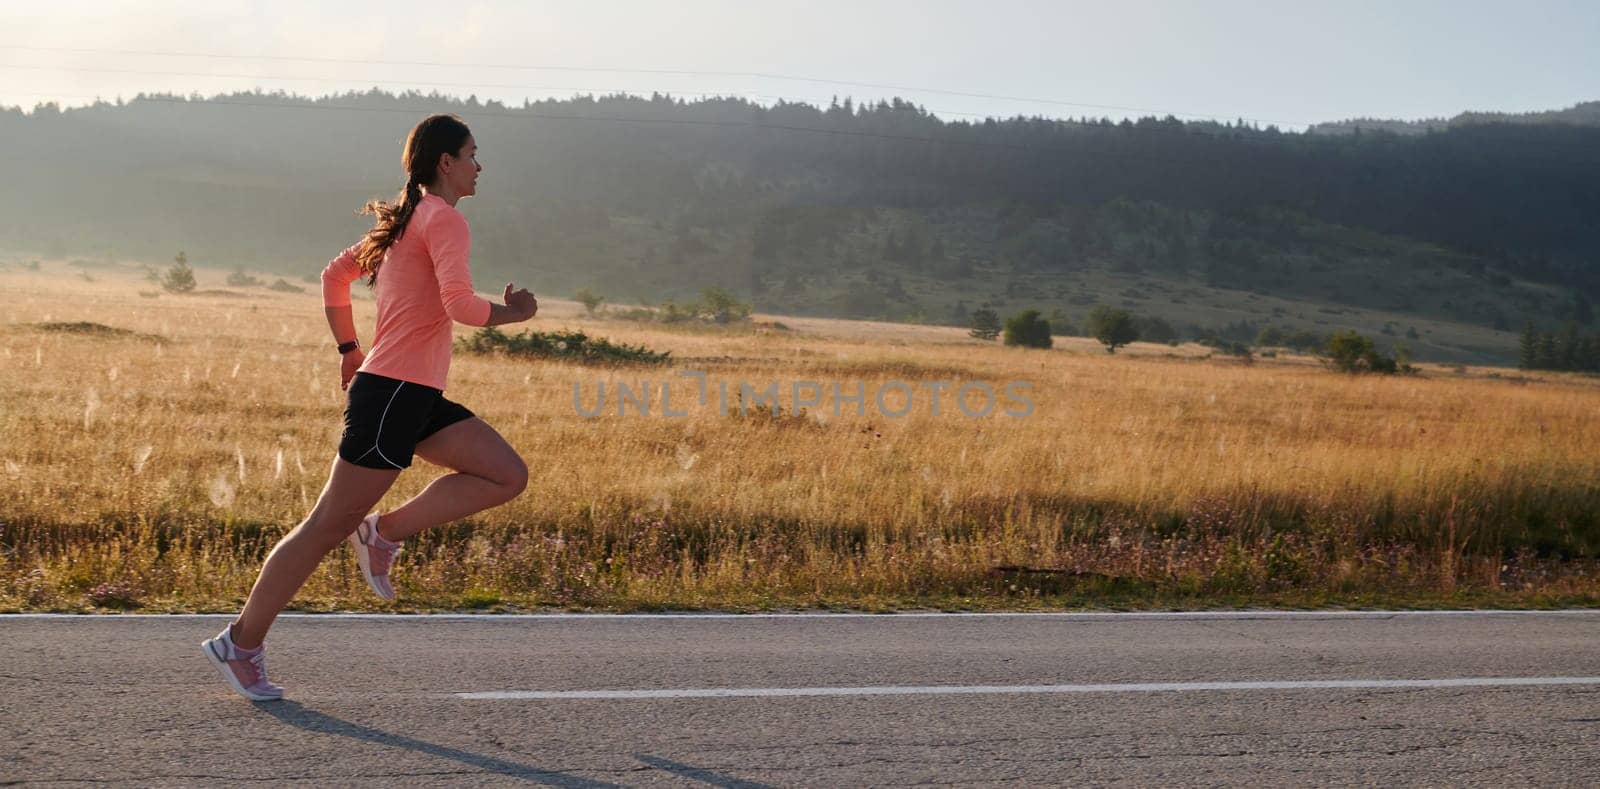 Determined Dawn: Confident and Motivated Athlete Embarks on Sunrise Run. by dotshock